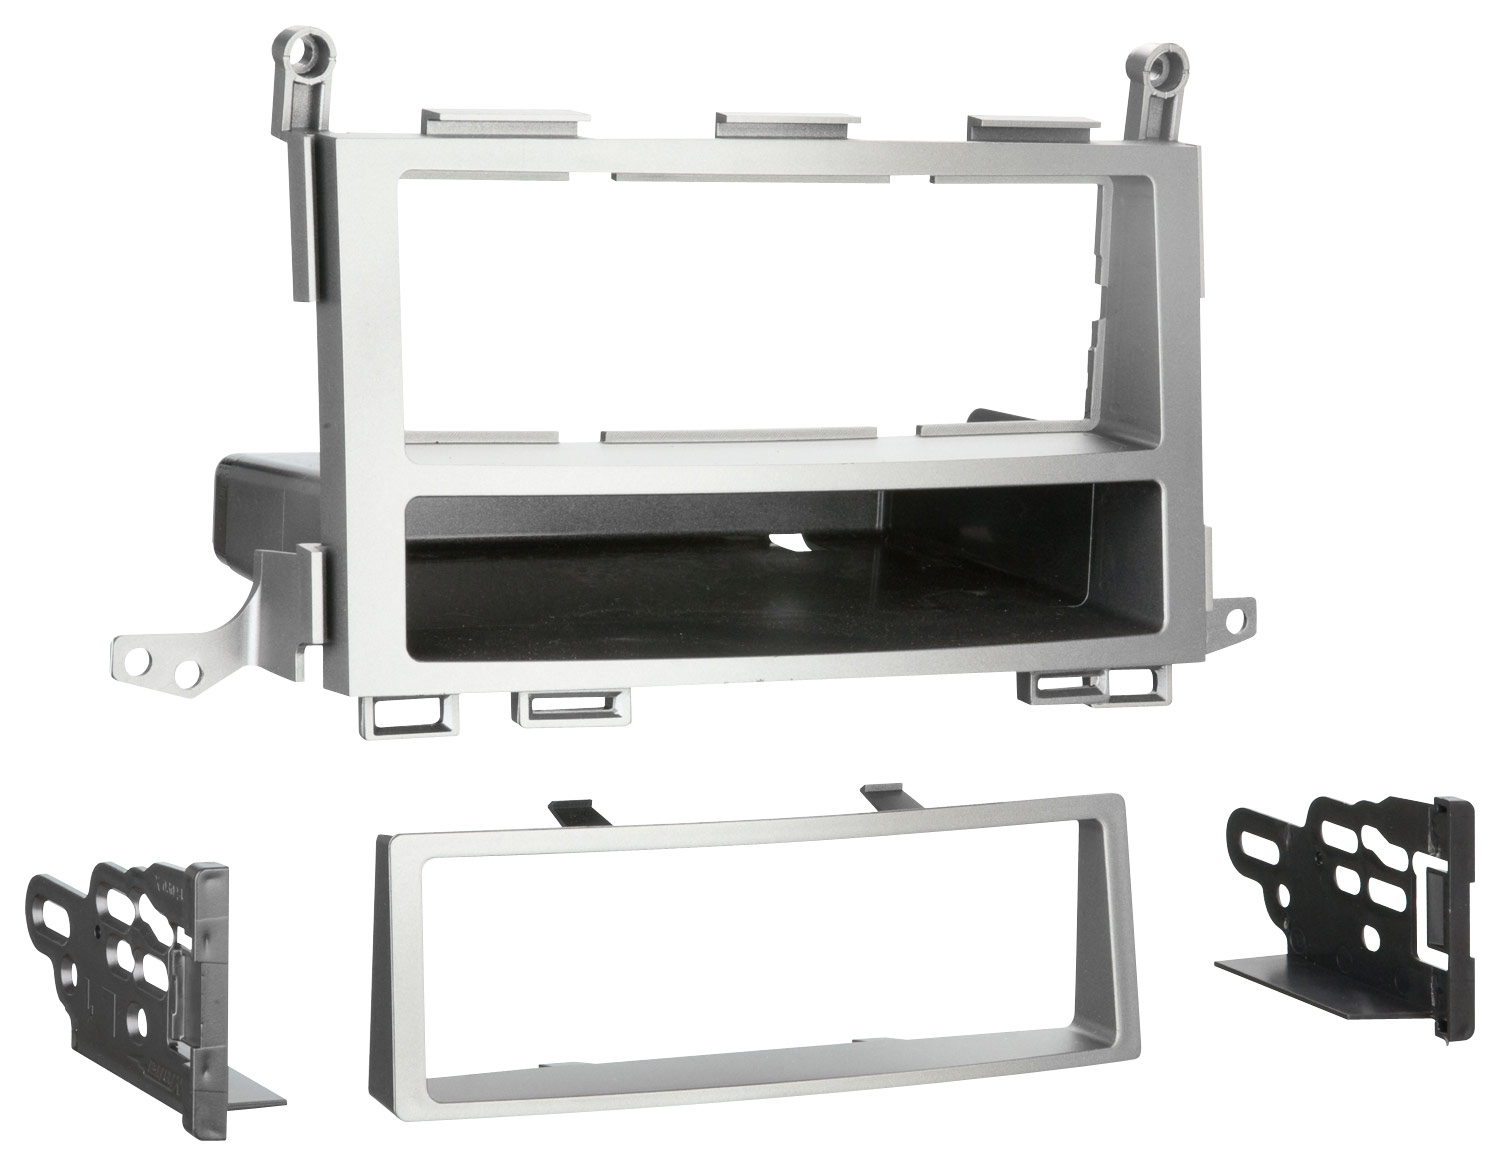 Metra - Dash Kit for Select 2009-2015 Toyota Venza - Gray was $16.99 now $12.74 (25.0% off)